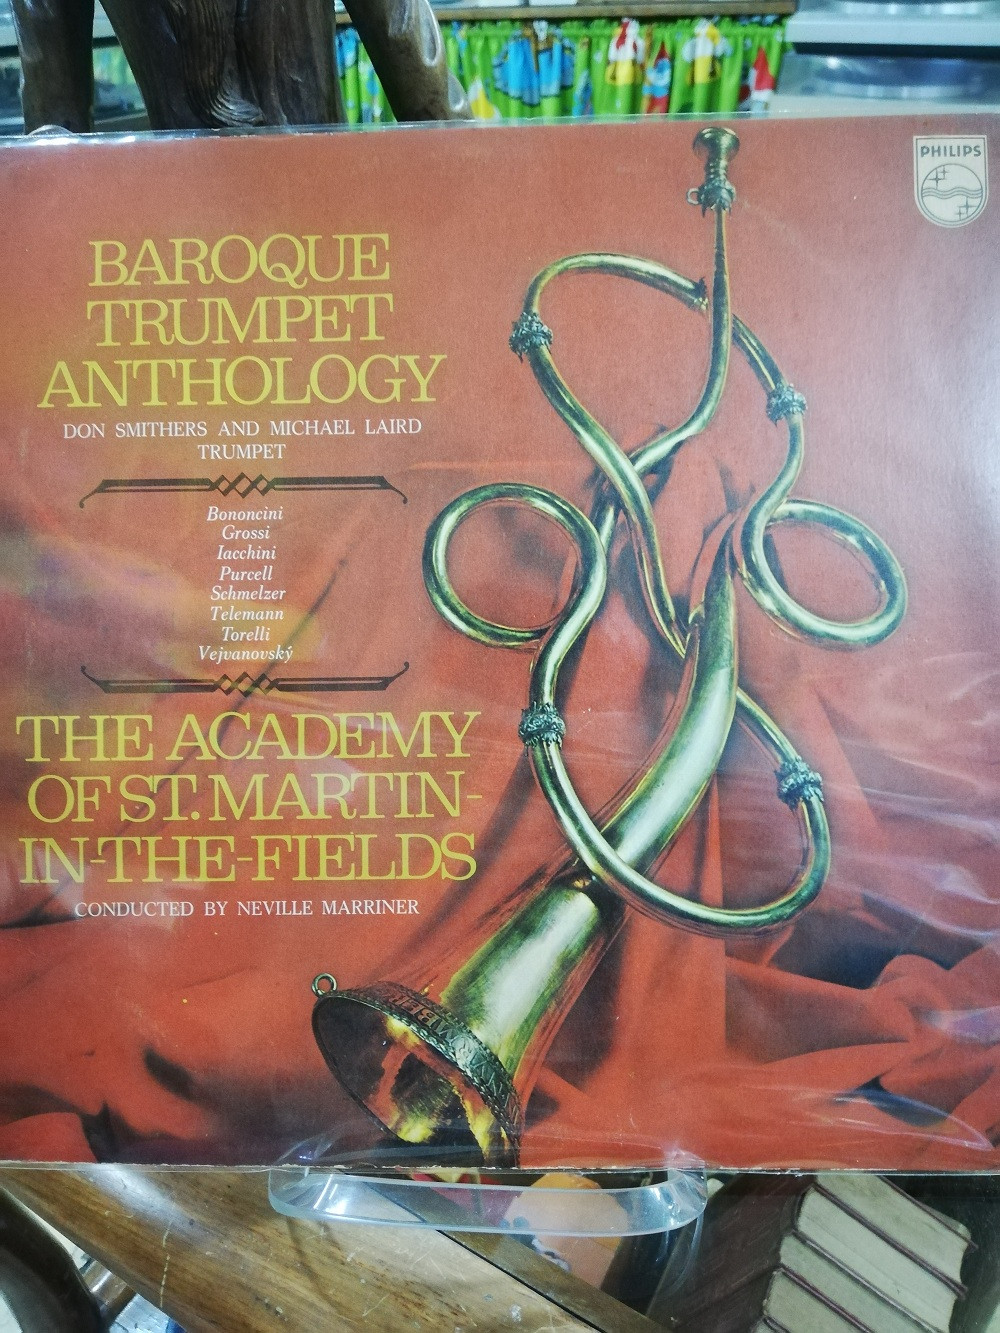 Imagen LP BARROQUE TRUMPET ANTHOLOGY - THE ACADEMY OF ST. MARTIN IN-THE-FIELDS 1